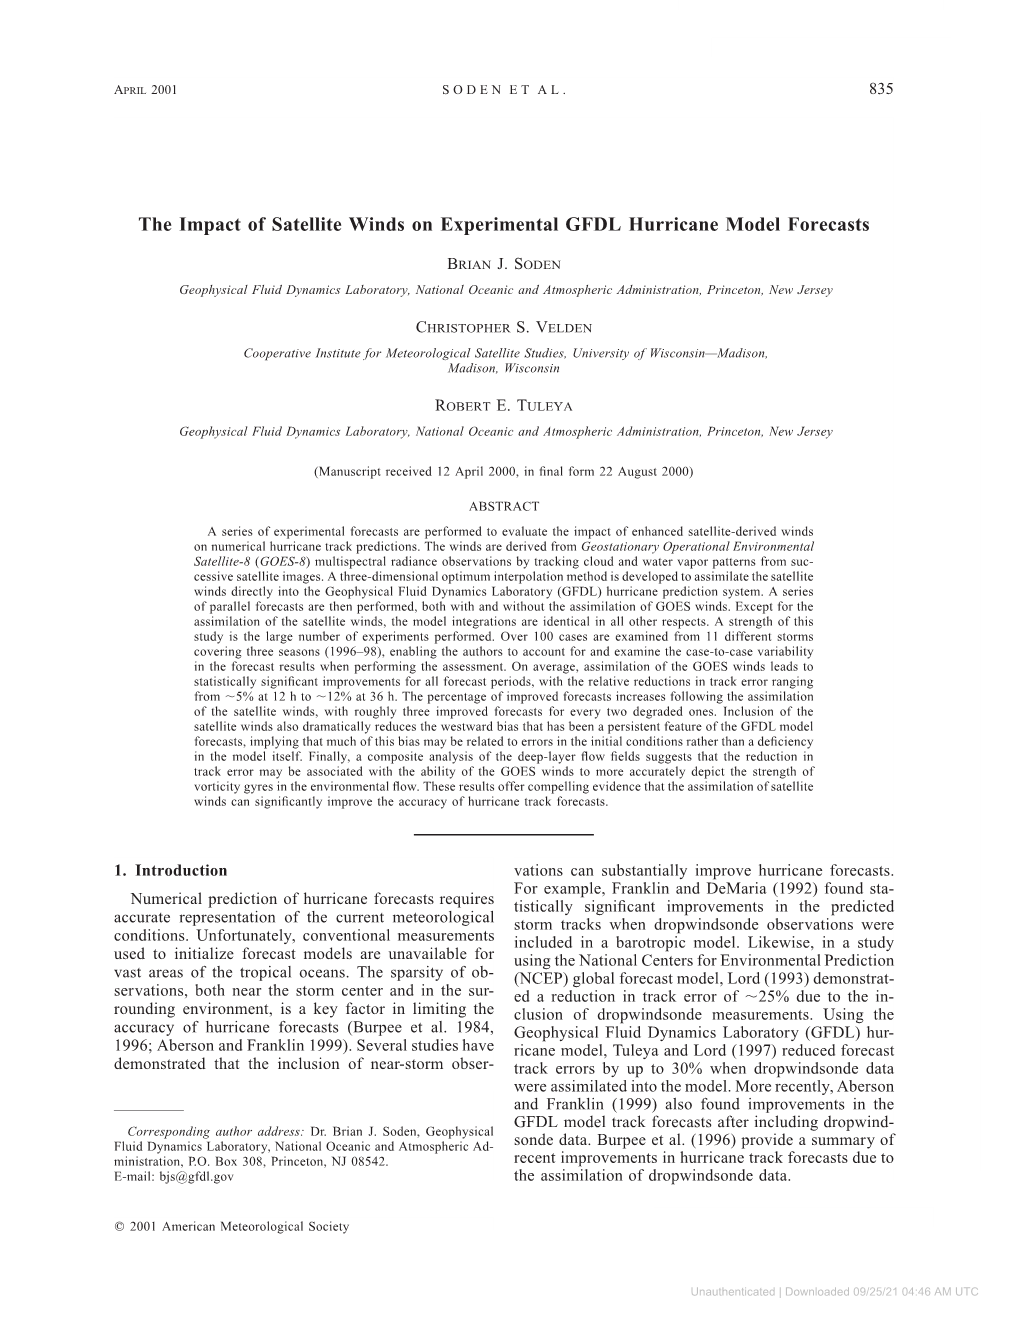 The Impact of Satellite Winds on Experimental GFDL Hurricane Model Forecasts